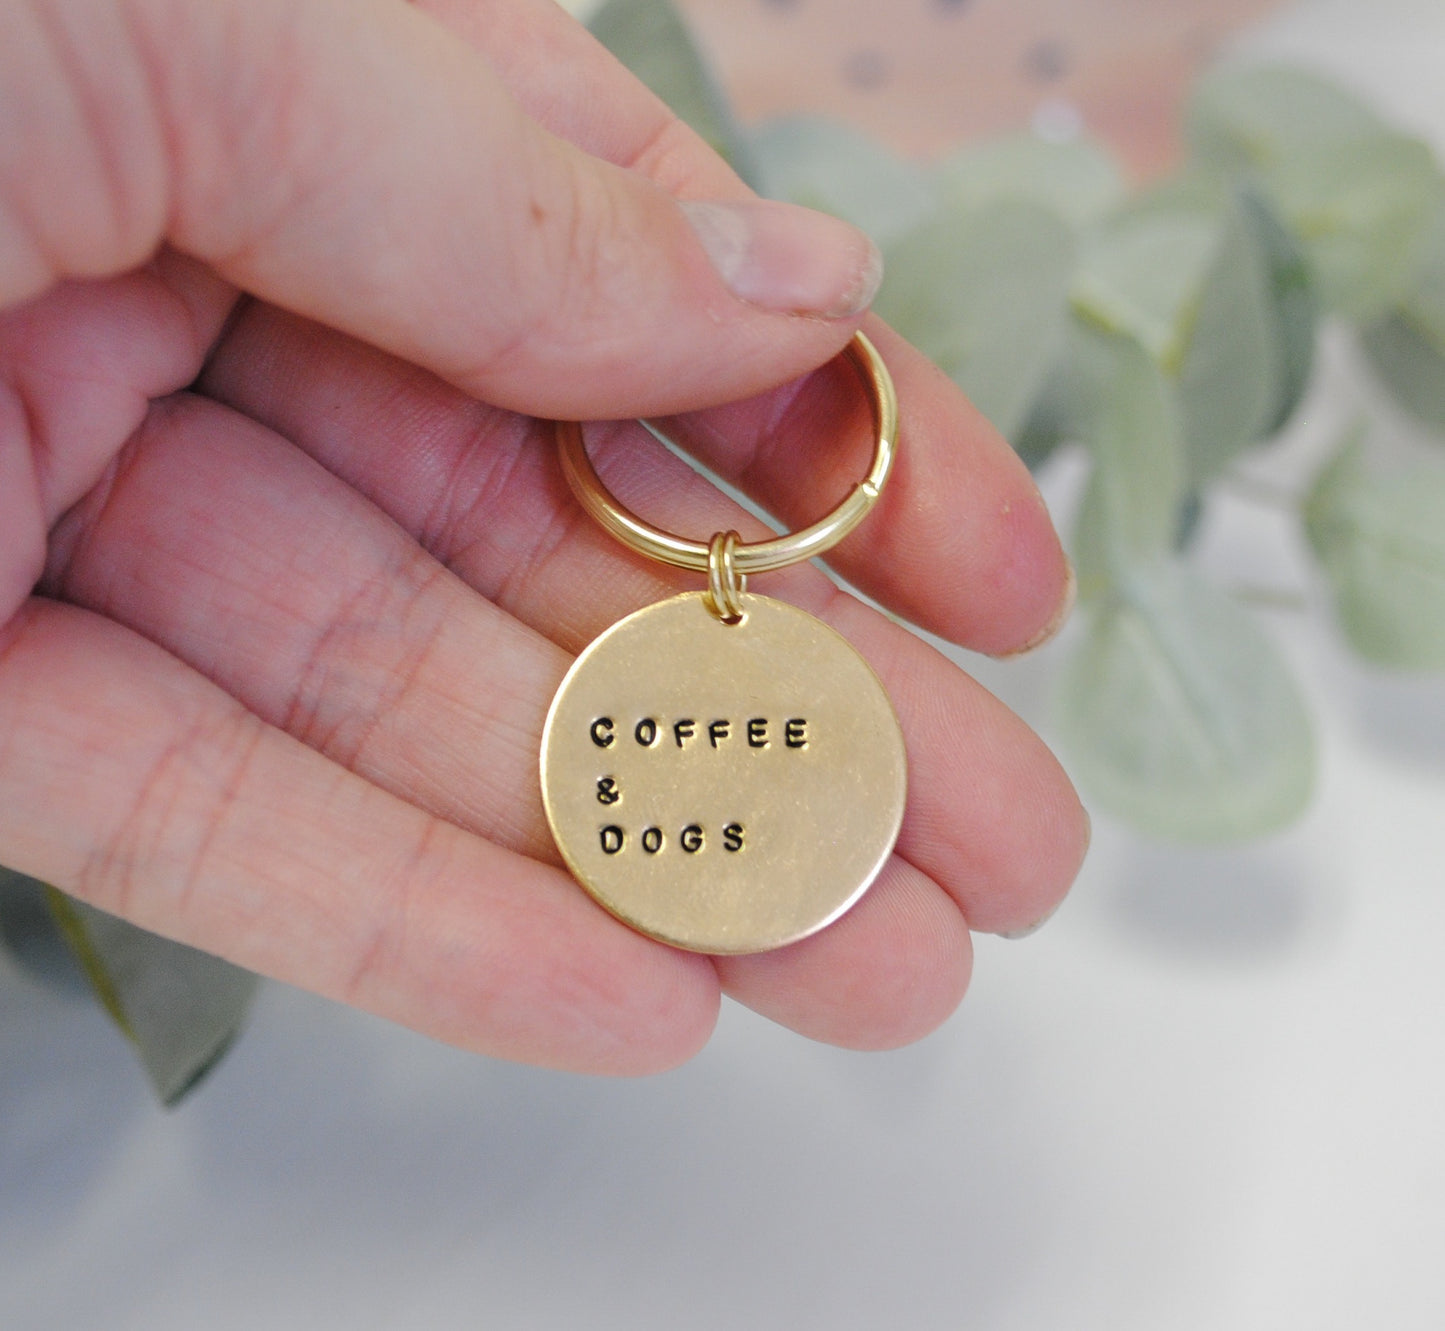 Coffee and Dogs Handstamped Keychain -  Dog Moms - Gift for Her - Coffee Lover Gift - Christmas Gift for Her - Christmas Gift for Him - Birthday Gift for Her - Birthday Gift for Him